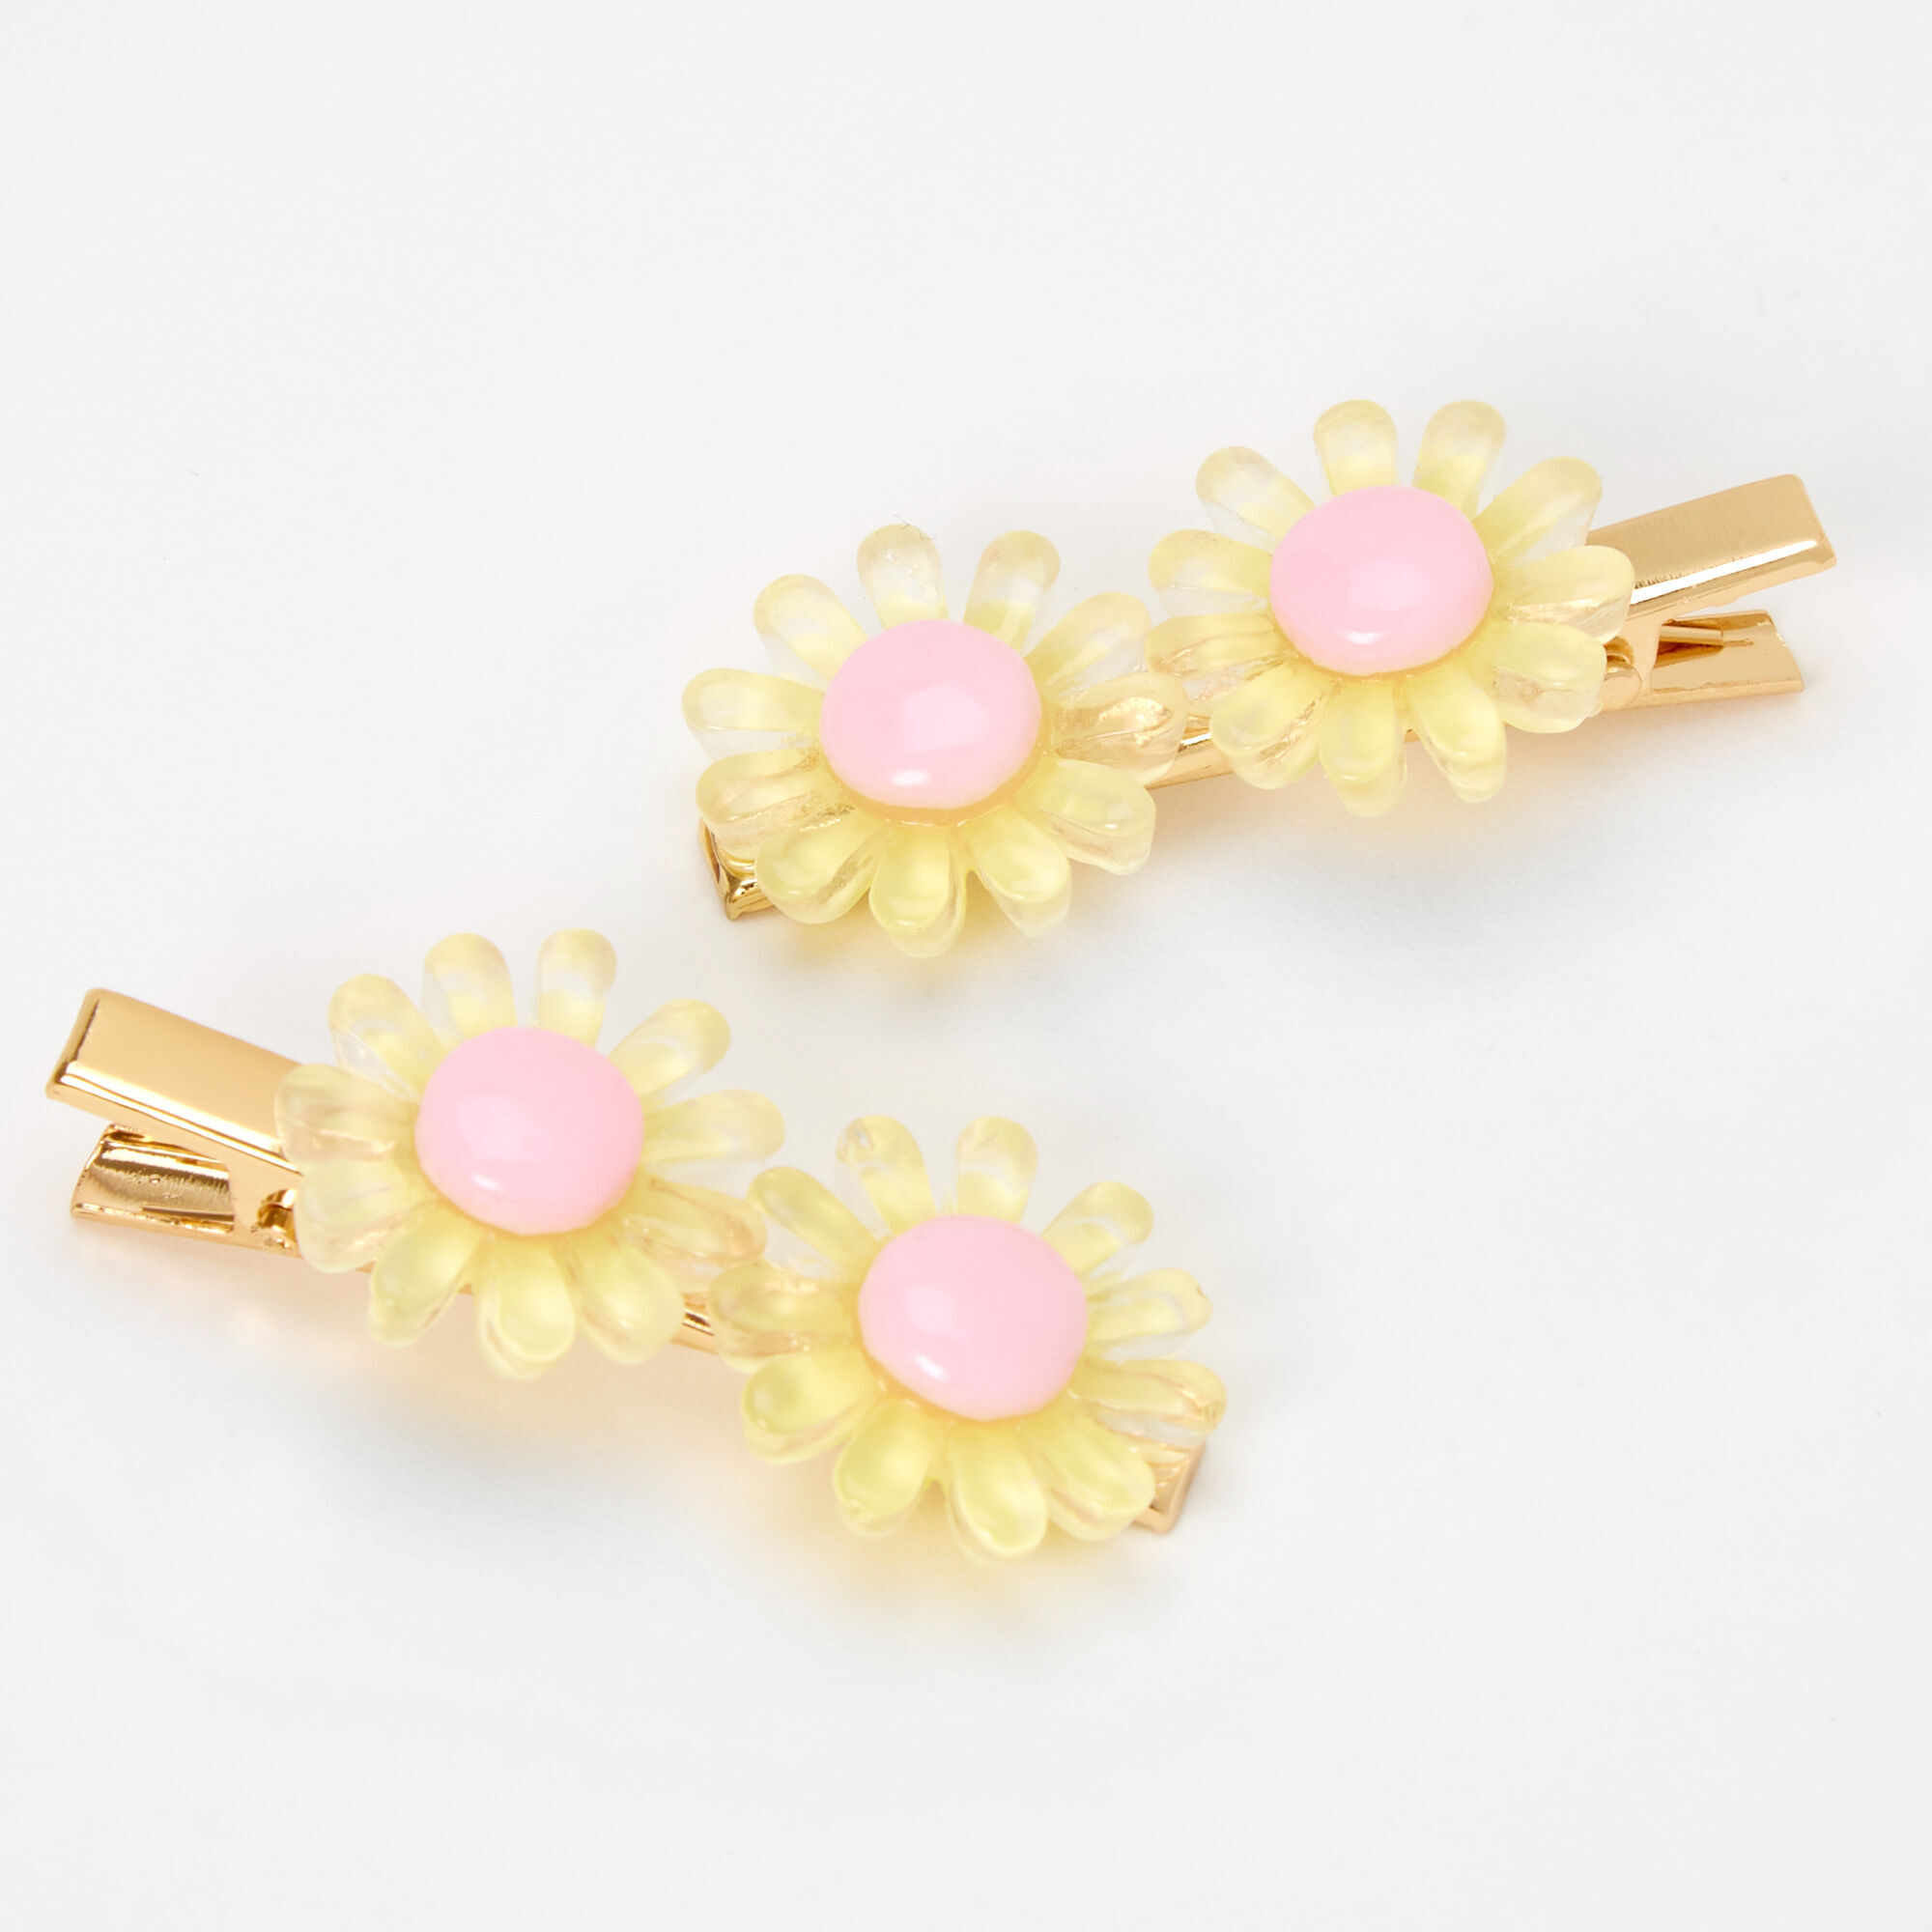 60s Hairstyles for Women and Teens Icing Yellow Daisy Flower Hair Clips - 2 Pack $7.99 AT vintagedancer.com